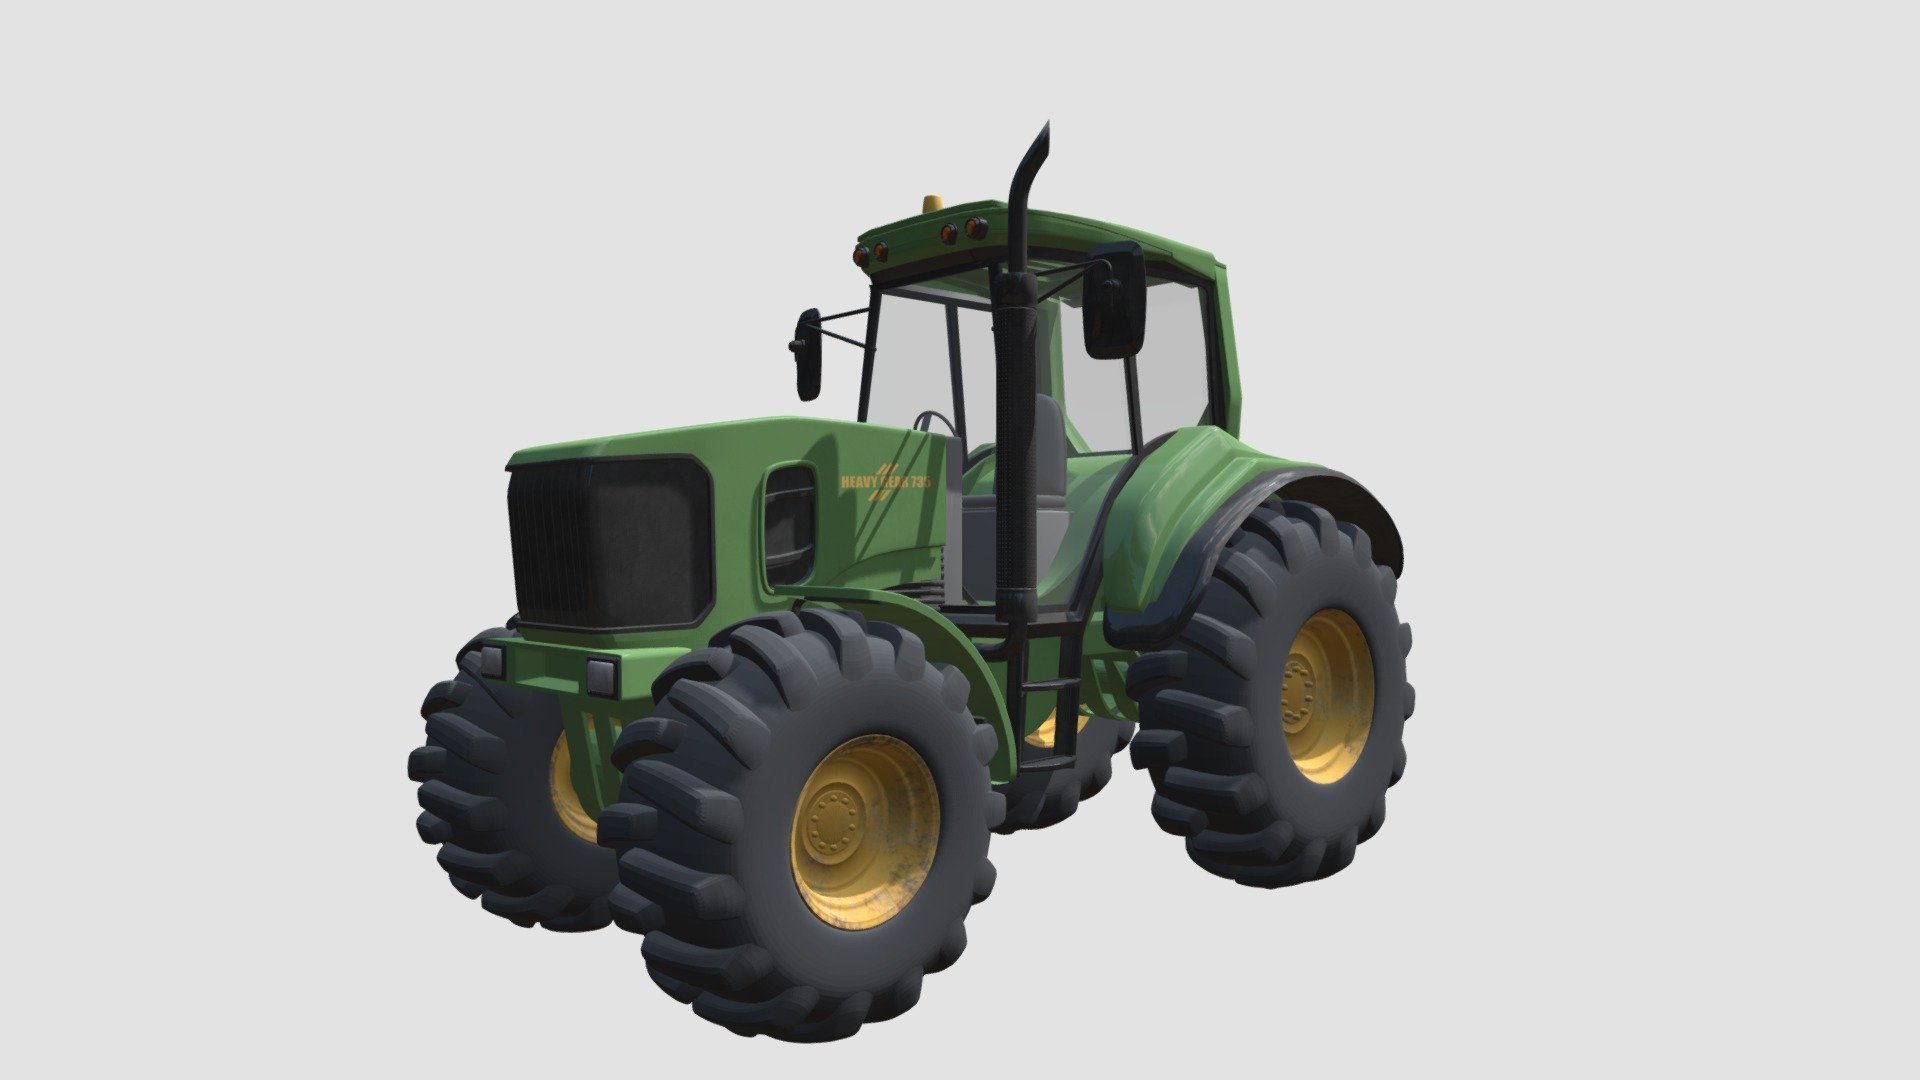 Highly detailed 3d model of tractor with textures, shaders and materials. It is ready to use, just put it into your scene 3d model